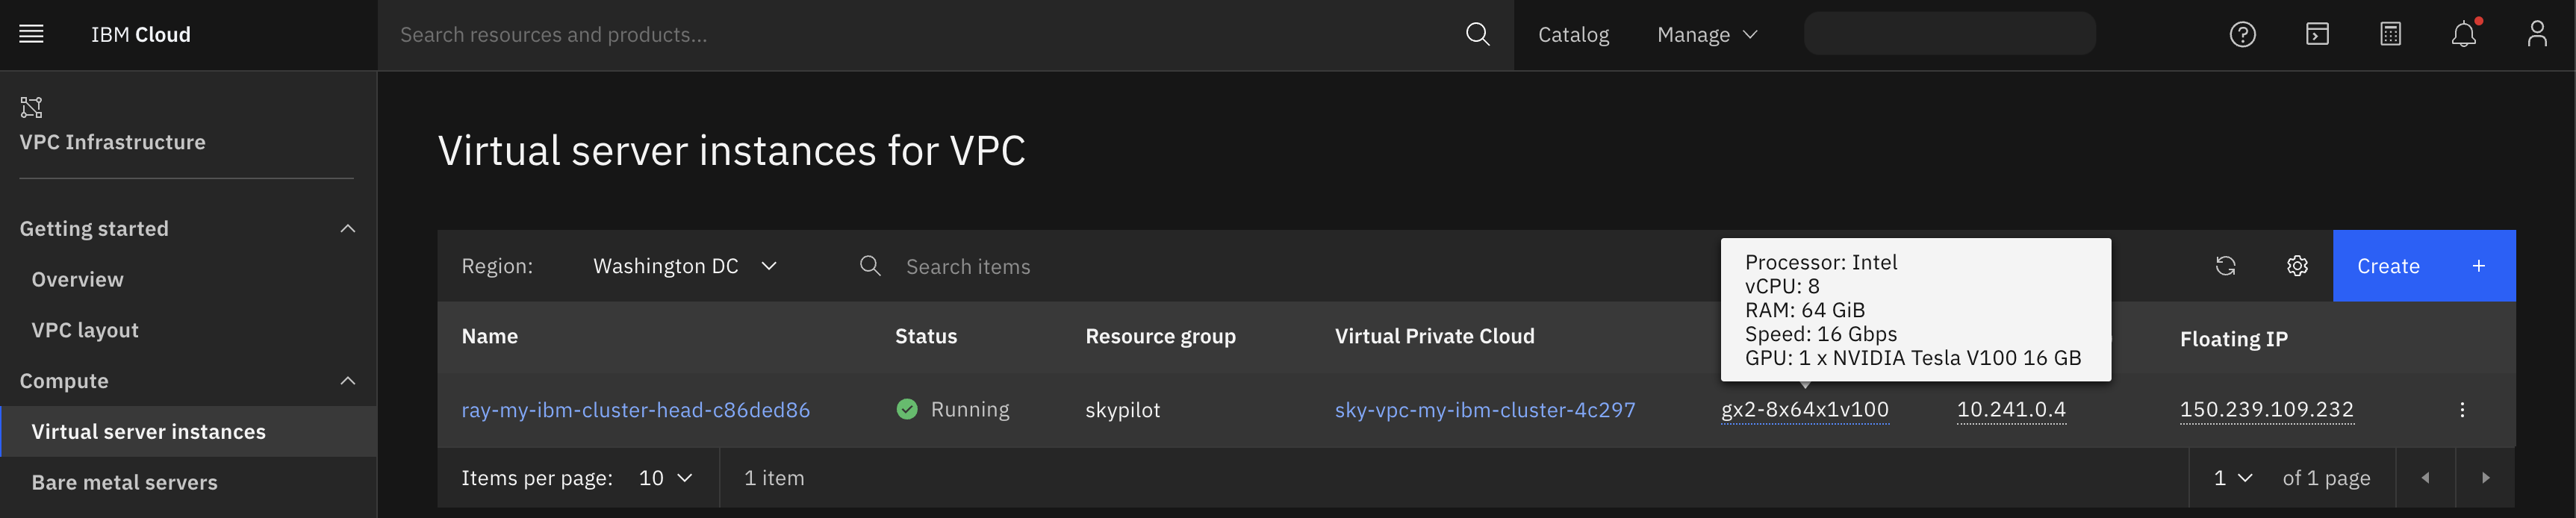 IBM cloud console showing a node launched by SkyPilot